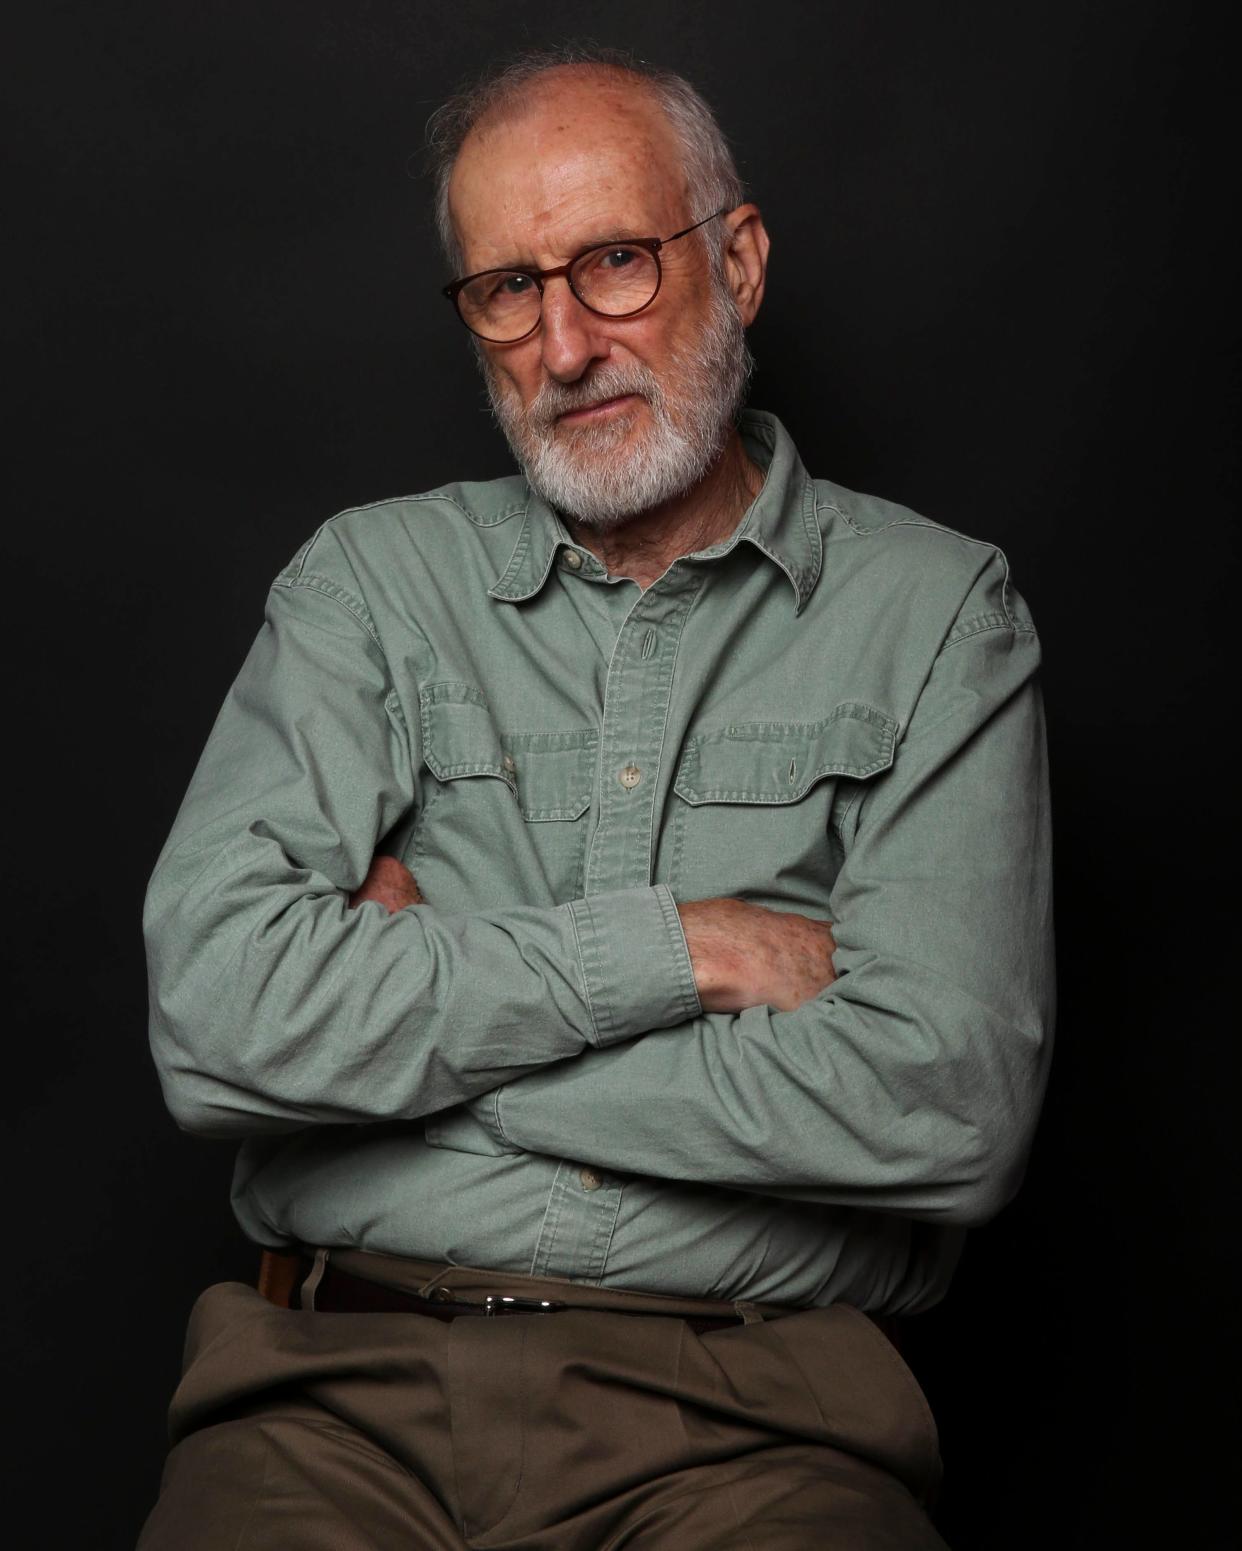 Actor James Cromwell poses for a portrait on July 31. (Photo: Gabriela Landazuri Saltos/HuffPost)